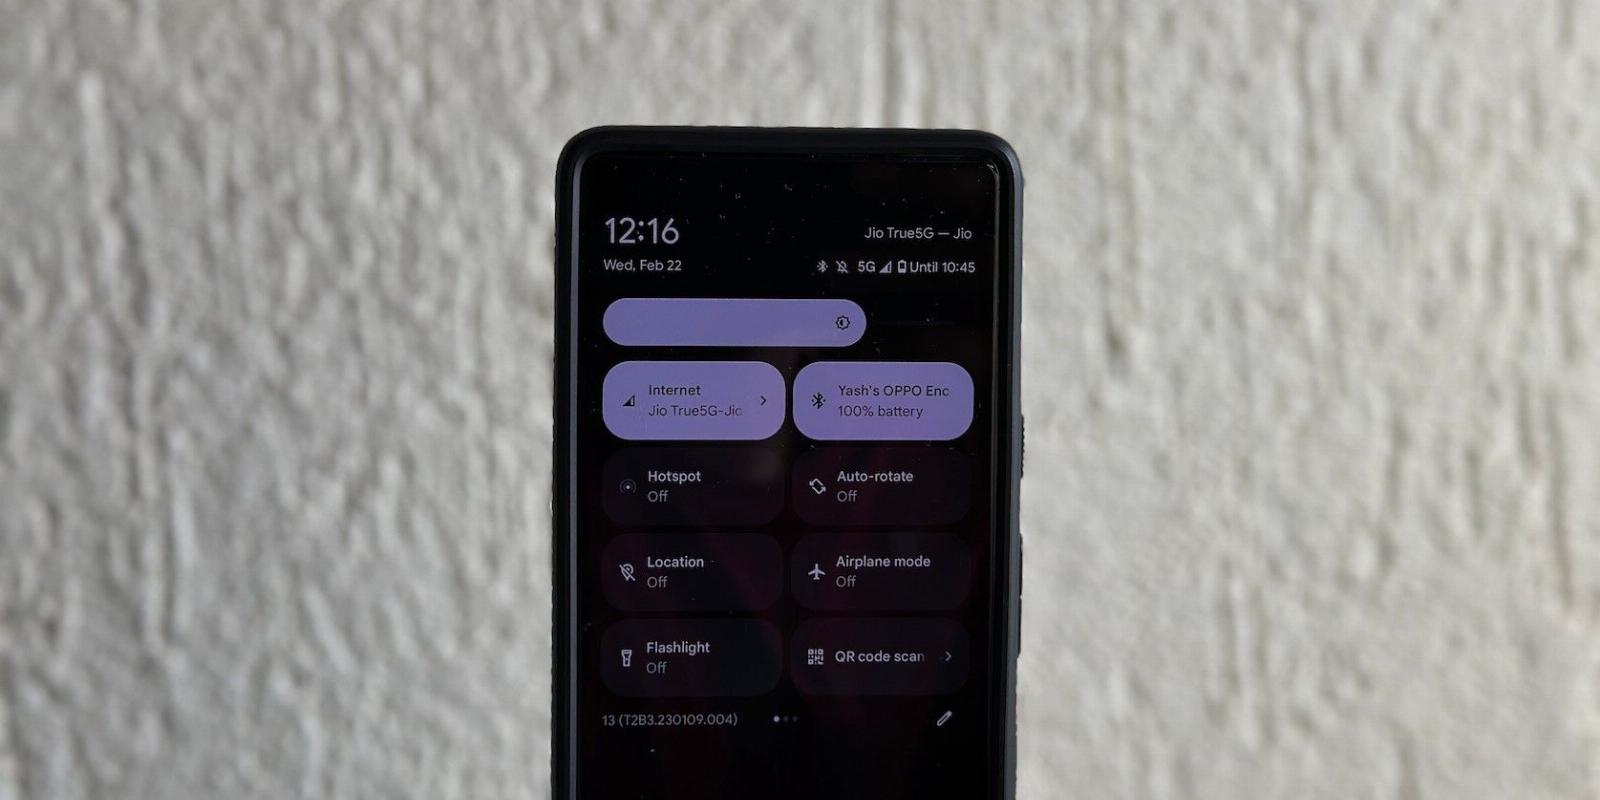 How to Customize the Quick Settings Panel on Android